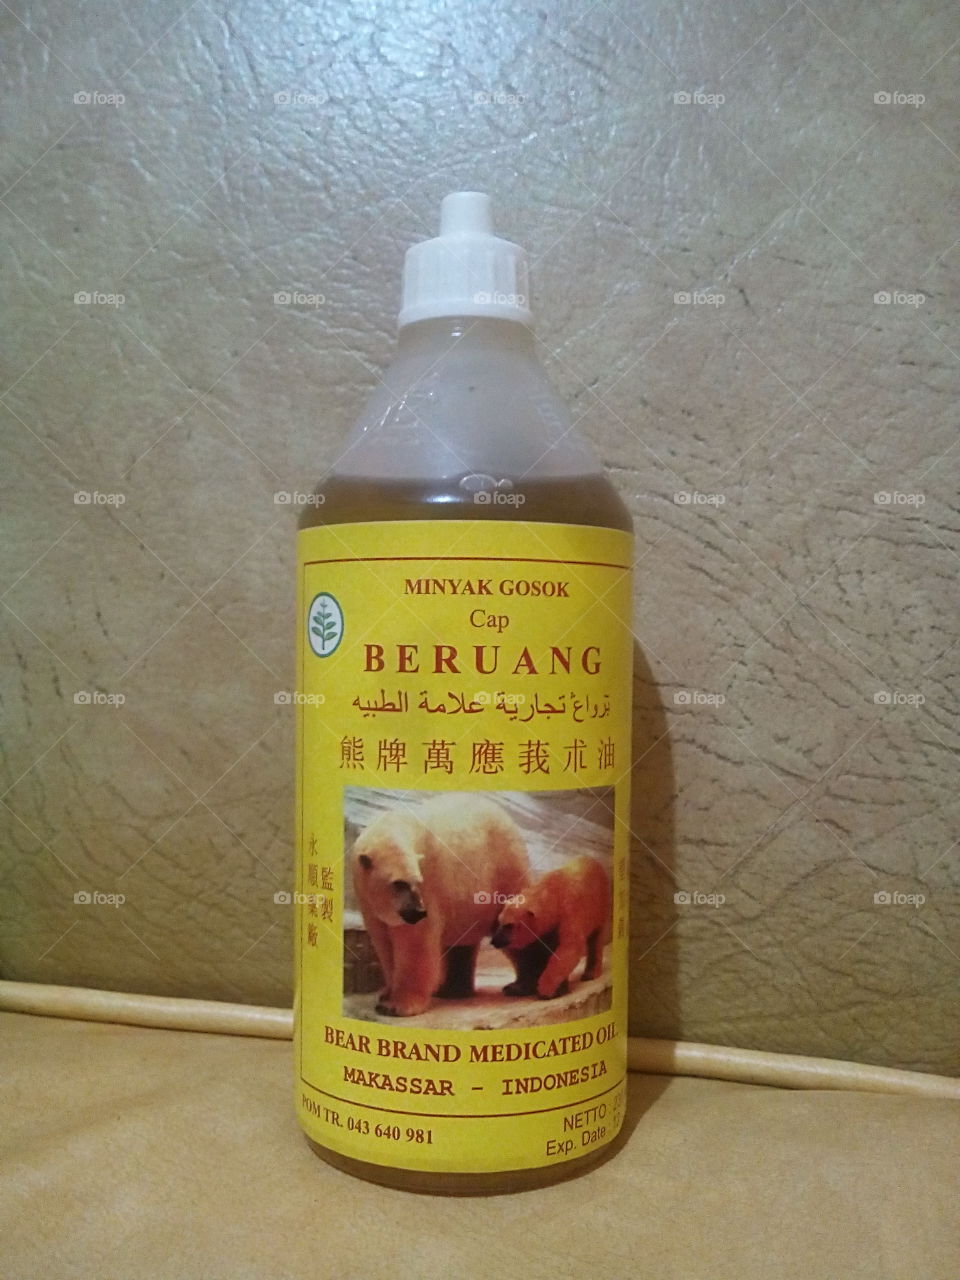 China Oil Brush Bear Brand for first aid kit, it can be use for burned, scratch, wound, and many more